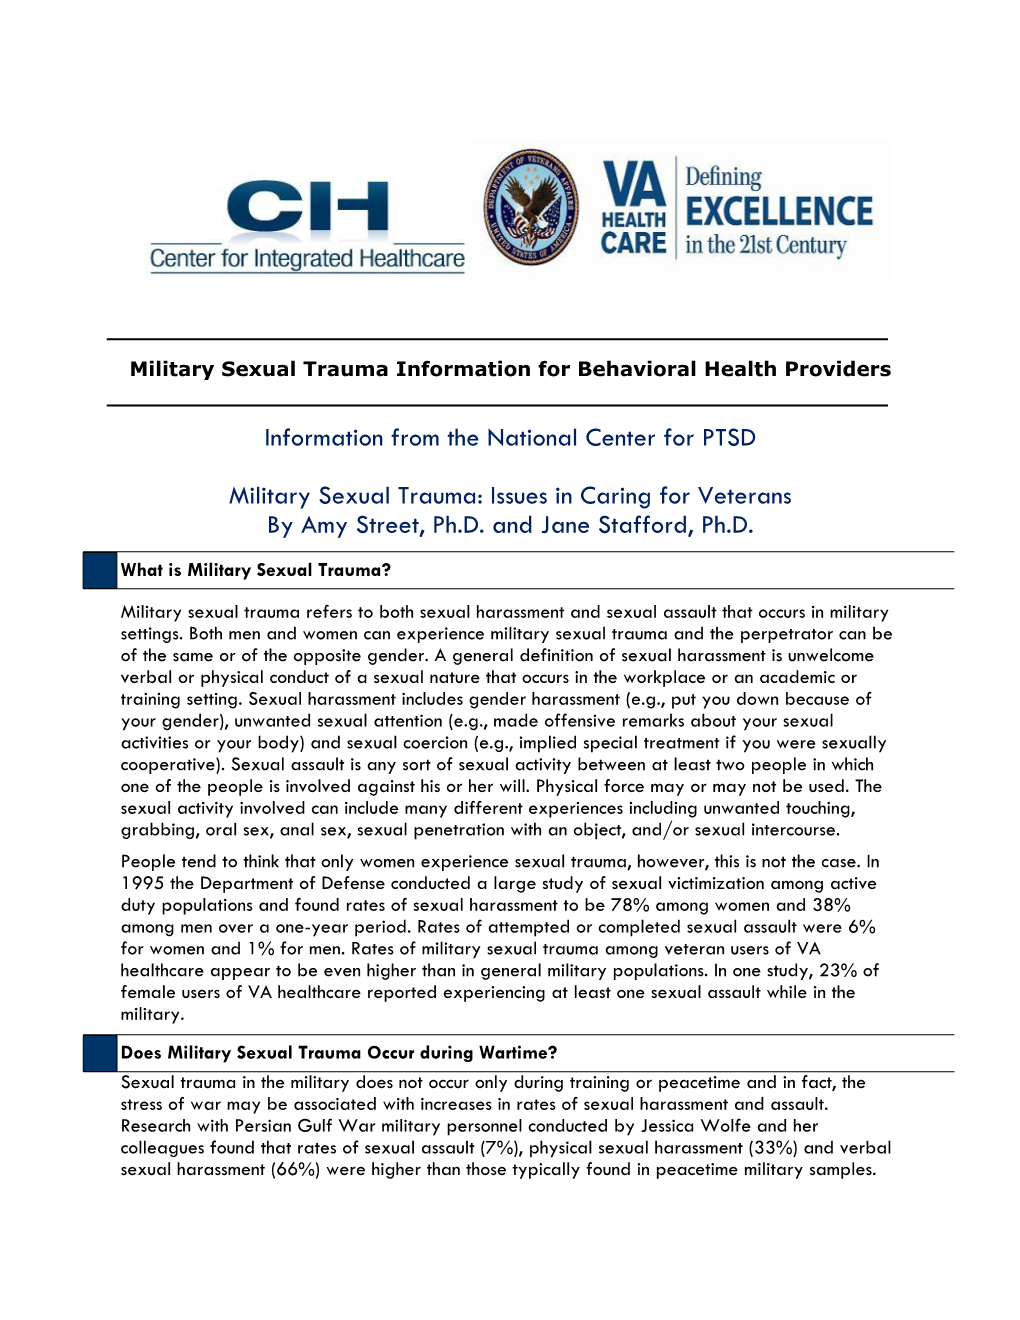 Military Sexual Trauma Information Sheet for Bhps